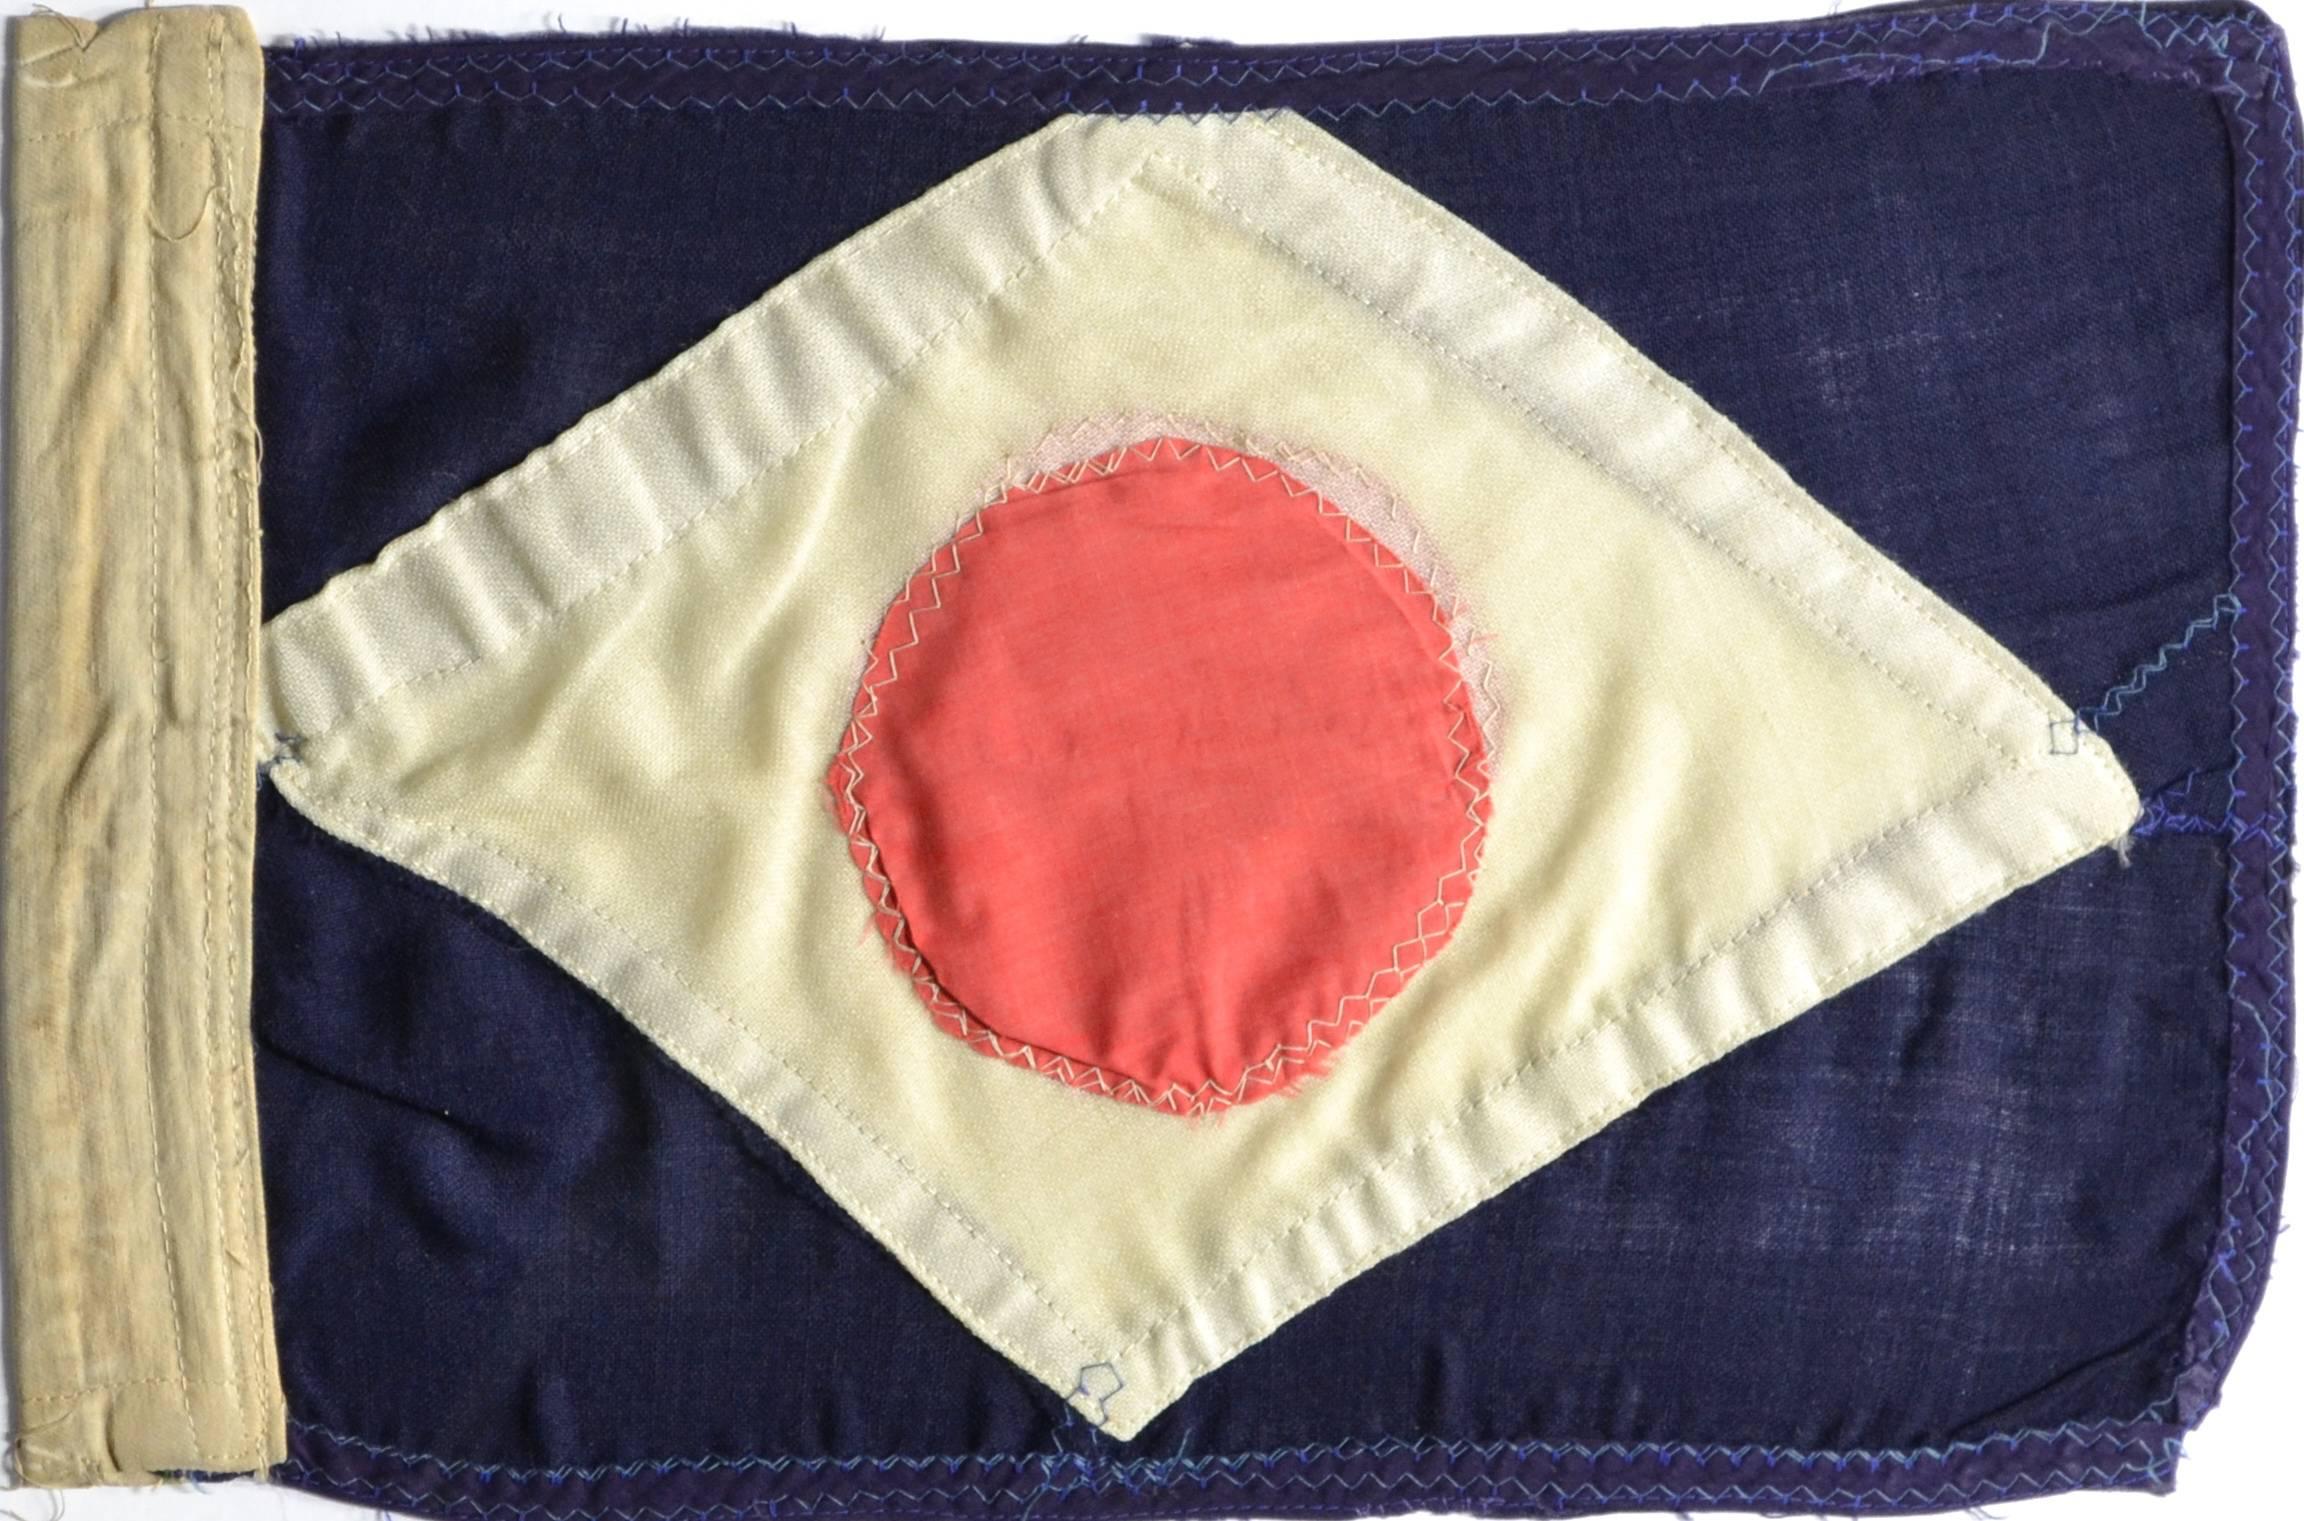 Rare antique hand-sewn yacht club bur-gee / flag. Beautiful stitching. Flags like this are almost impossible to find these days. Made of wool, the red circle appears to be linen. Canvas sleeve hoist. Flag is 11" x 17" frame 17" x